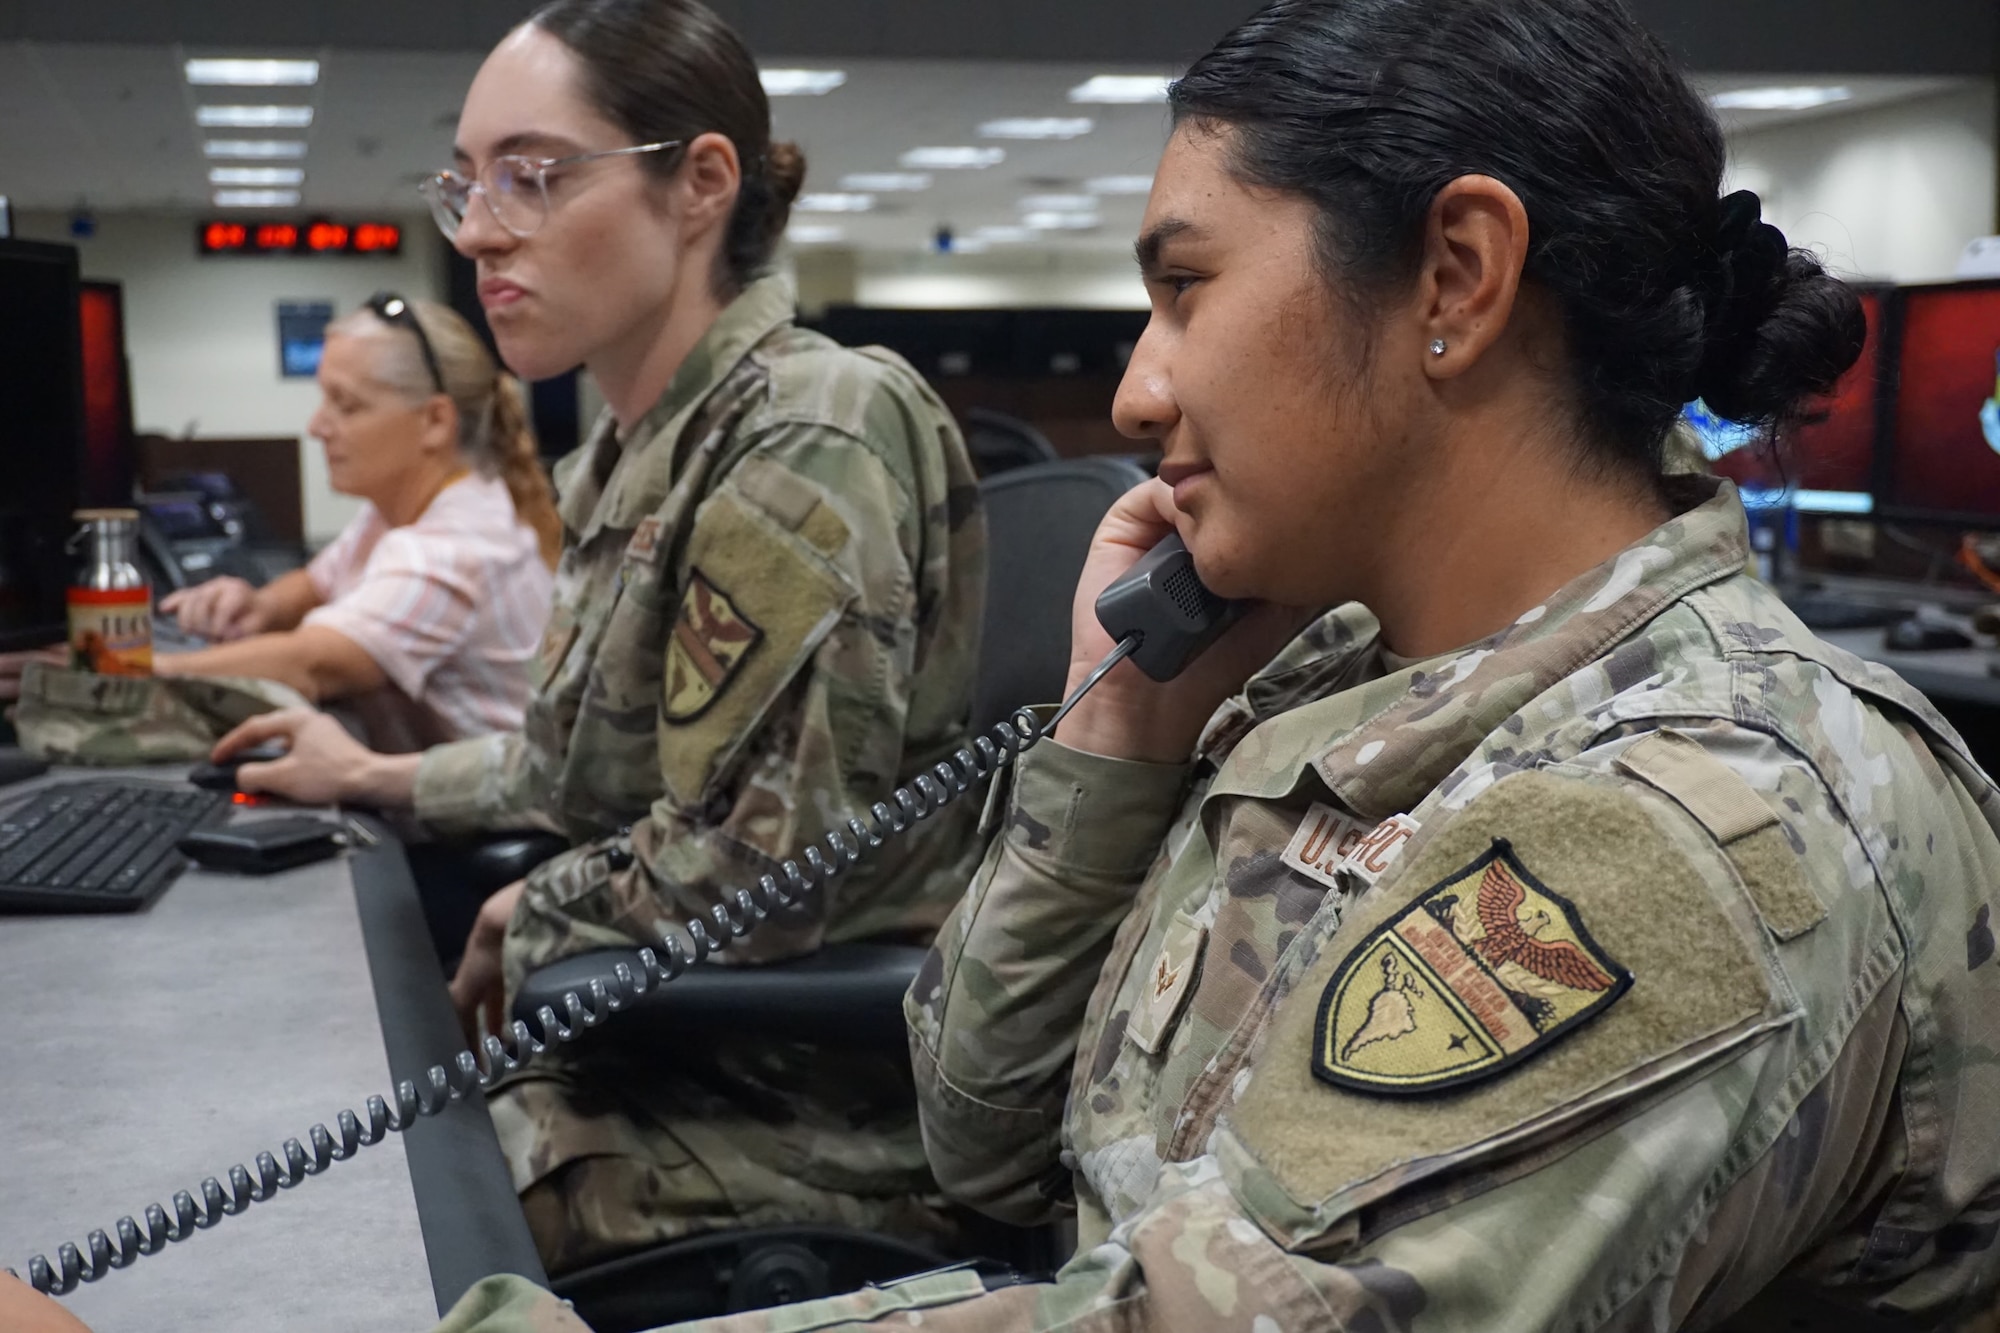 photo of two uniformed U.S. Air Force Airmen and one civilian sitting at computers, one Airman is holding a phone